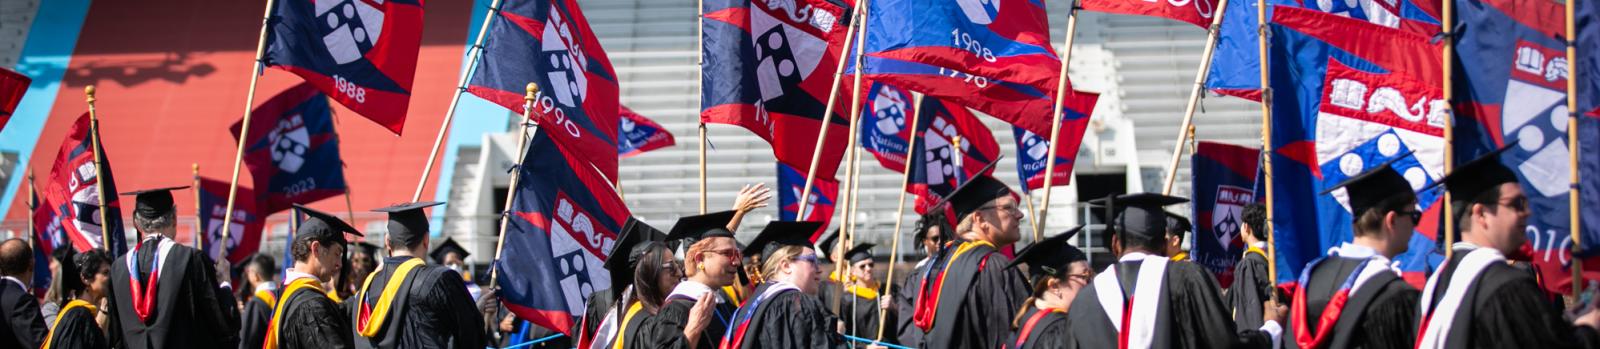 Alumni at Commencement, carrying class year flags